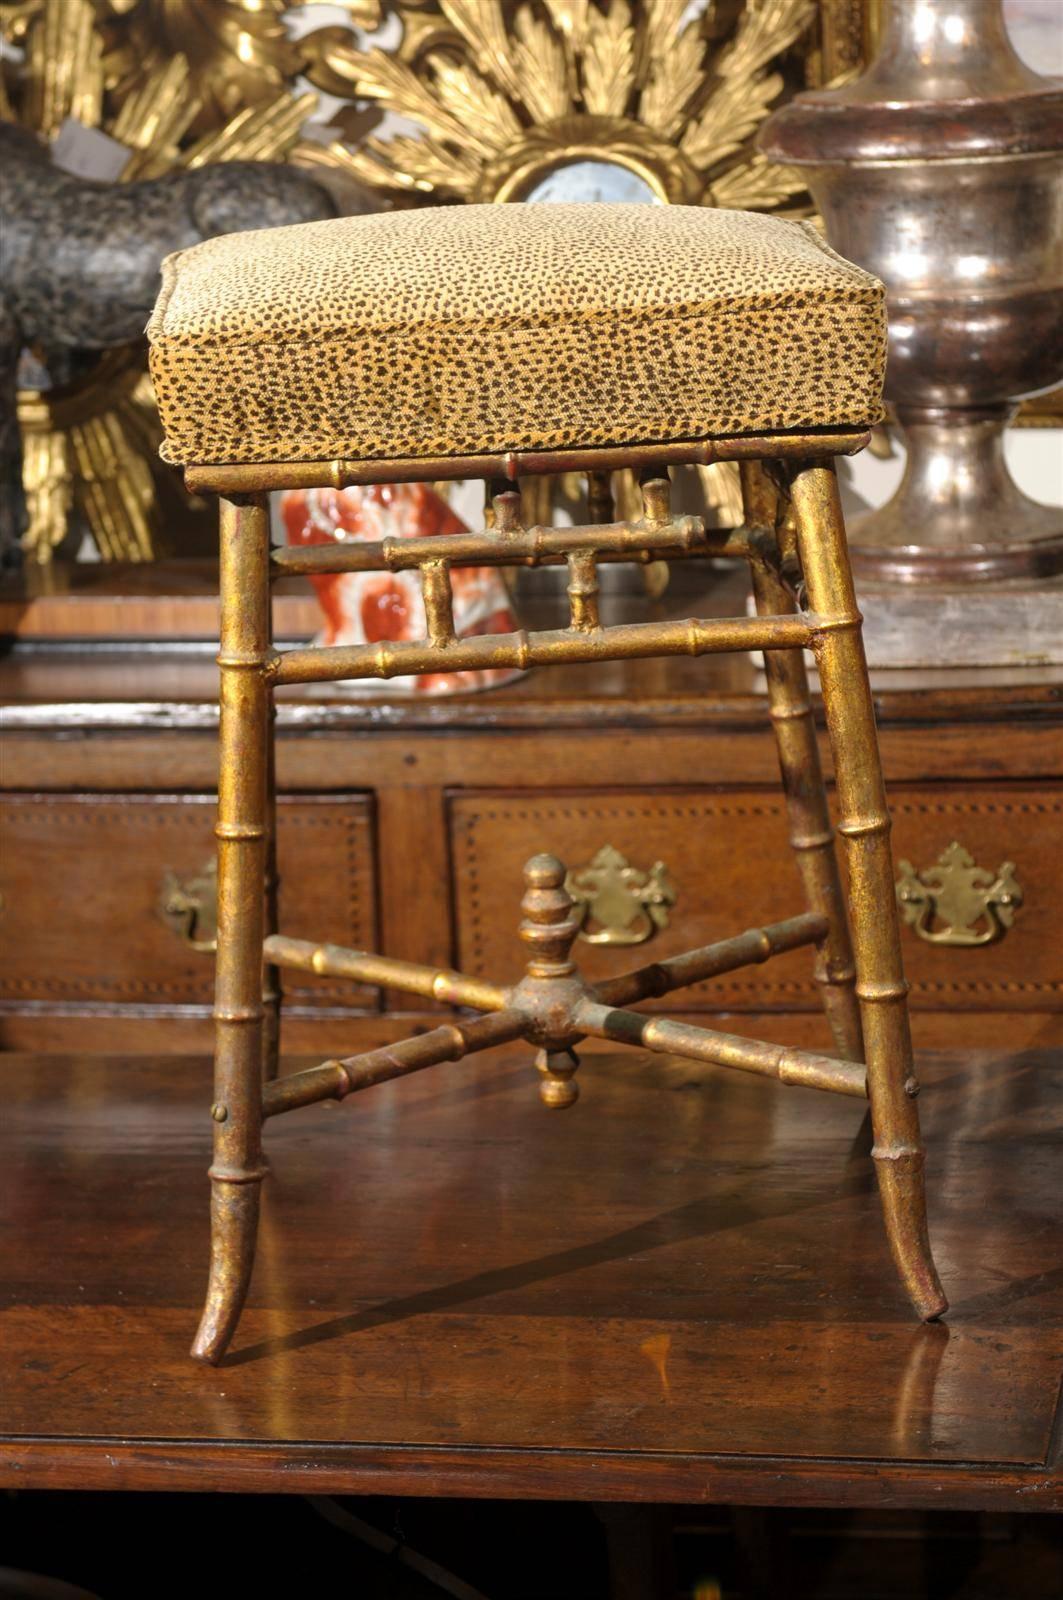 Chinoiserie Italian Gilt Iron Faux-Bamboo Stool with Animal Print Upholstery from the 1950s